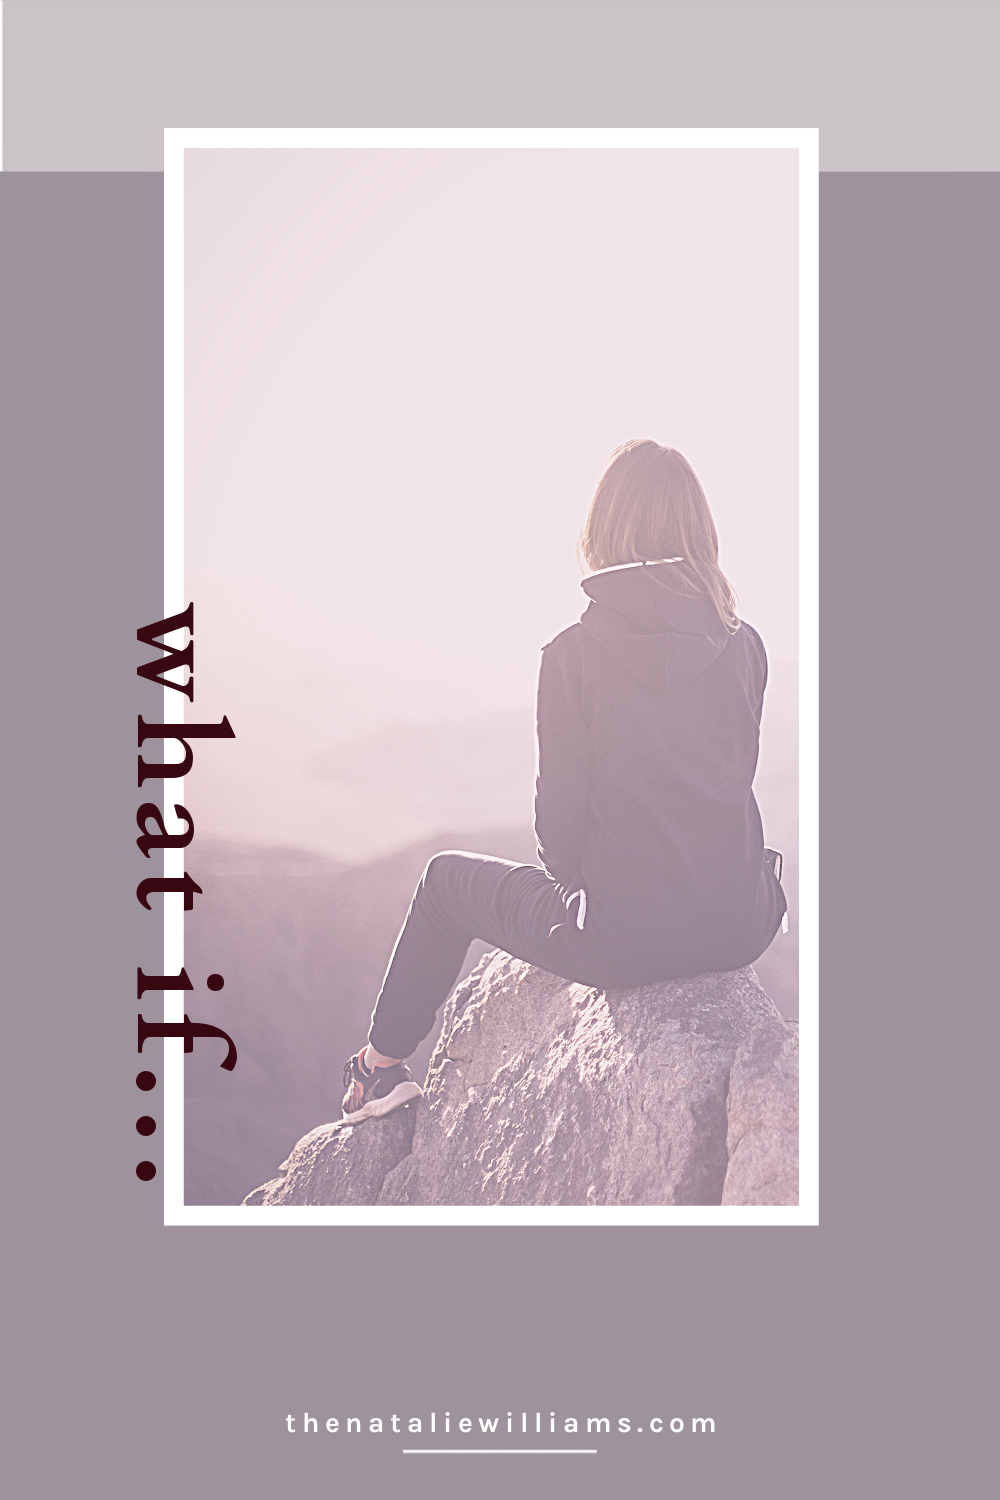 Who are you? text vertically along a photo of a woman standing on a beach looking skywards with the text journaling prompts for uncovering who you are below